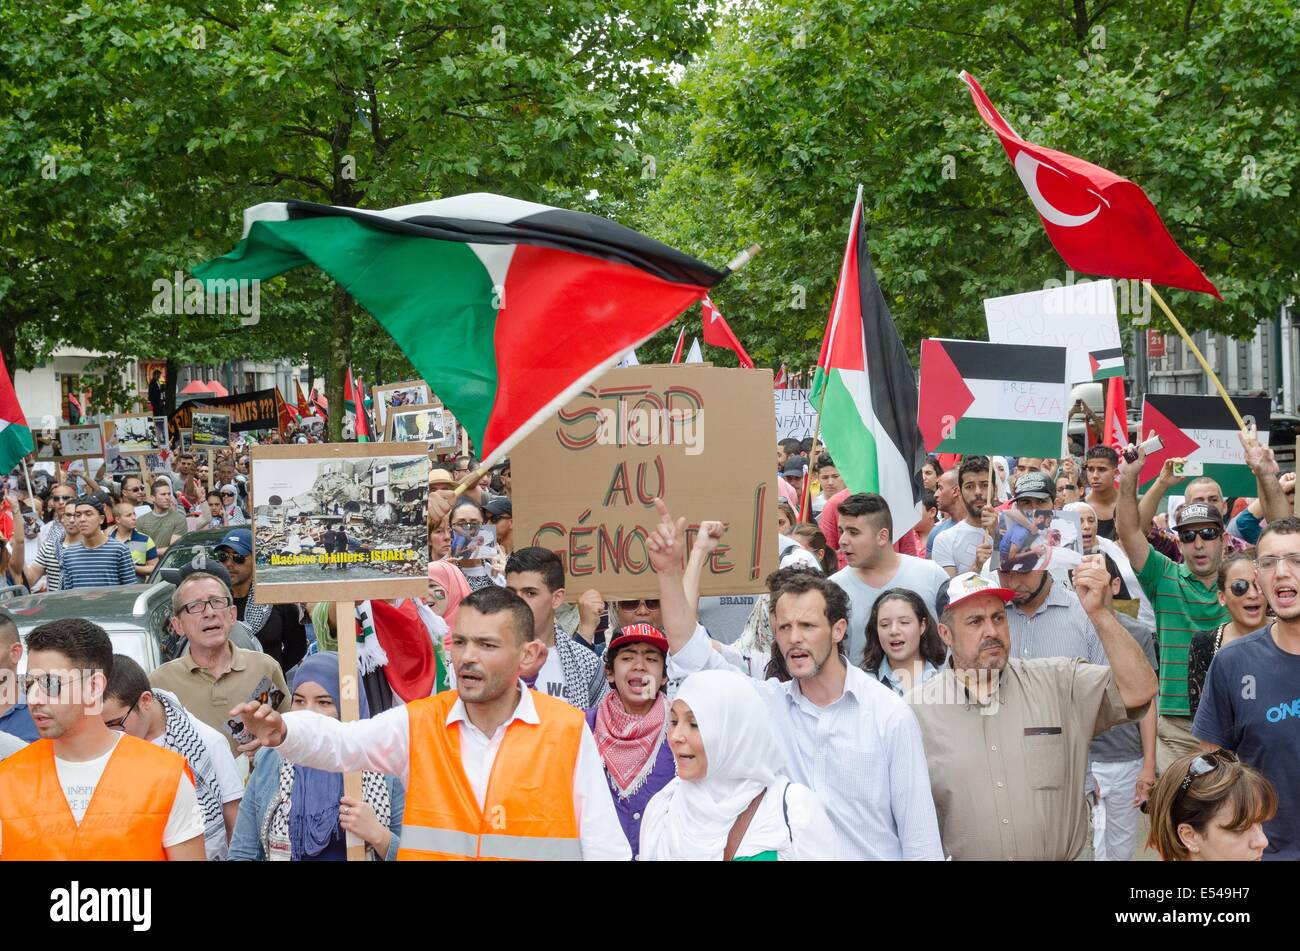 Brussels, Belgium. 19th July, 2014. Around 5.000 people marched through Brussels on Saturday, July 19, 2014 afternoon in protest at the Israeli military operation in Gaza. The demonstration showing solidarity with Palestinians. Credit:  Jonathan Raa/NurPhoto/ZUMA Wire/Alamy Live News Stock Photo